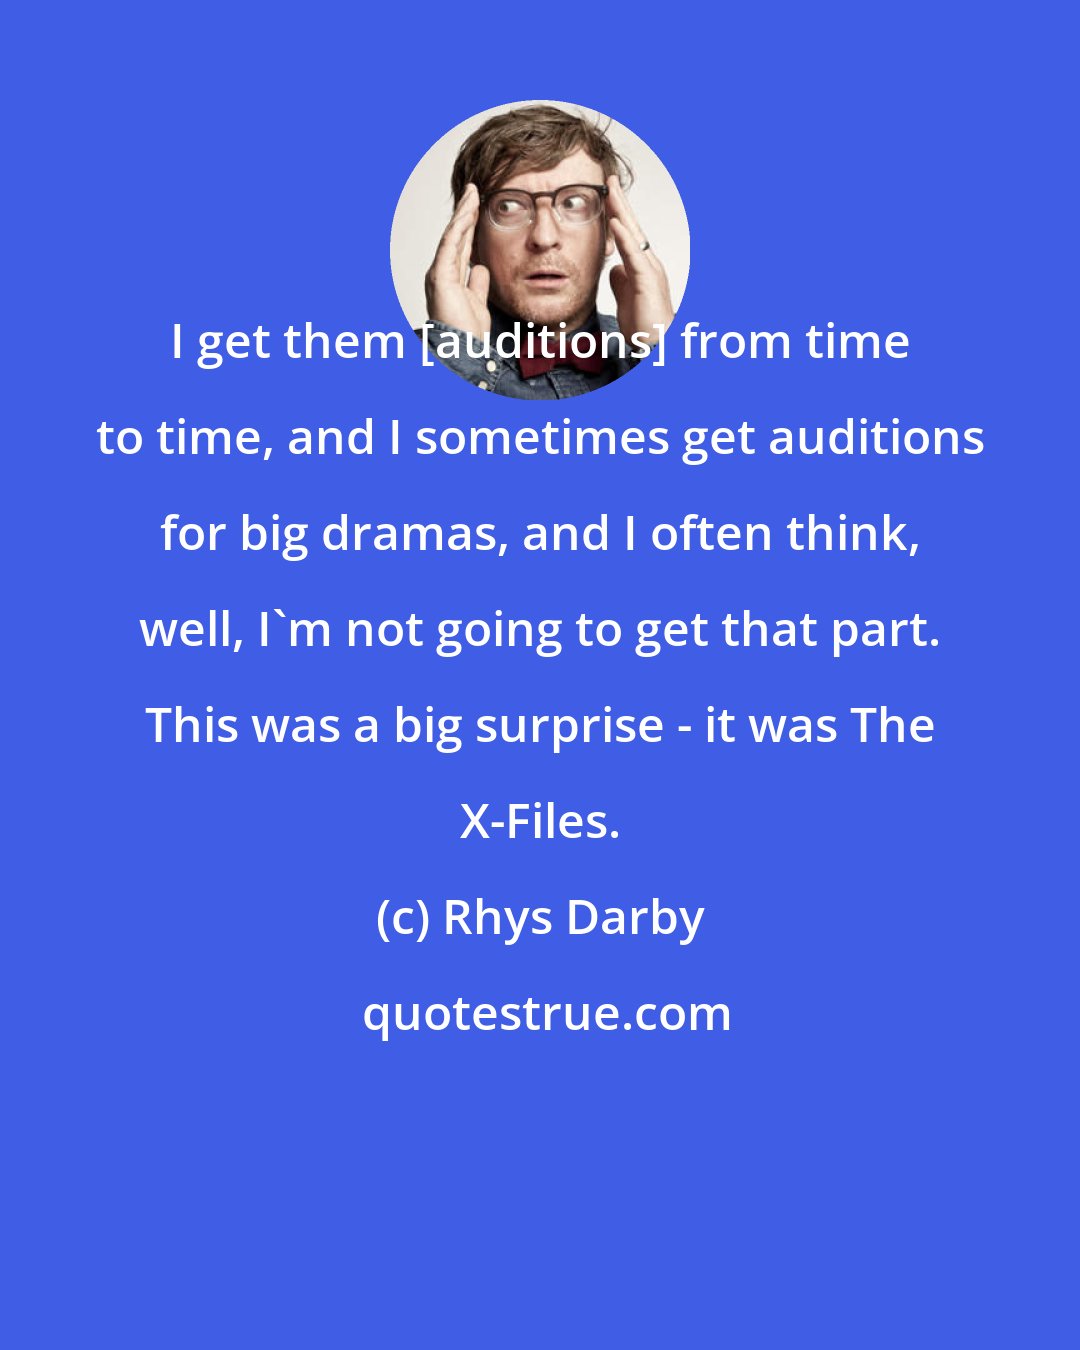 Rhys Darby: I get them [auditions] from time to time, and I sometimes get auditions for big dramas, and I often think, well, I'm not going to get that part. This was a big surprise - it was The X-Files.